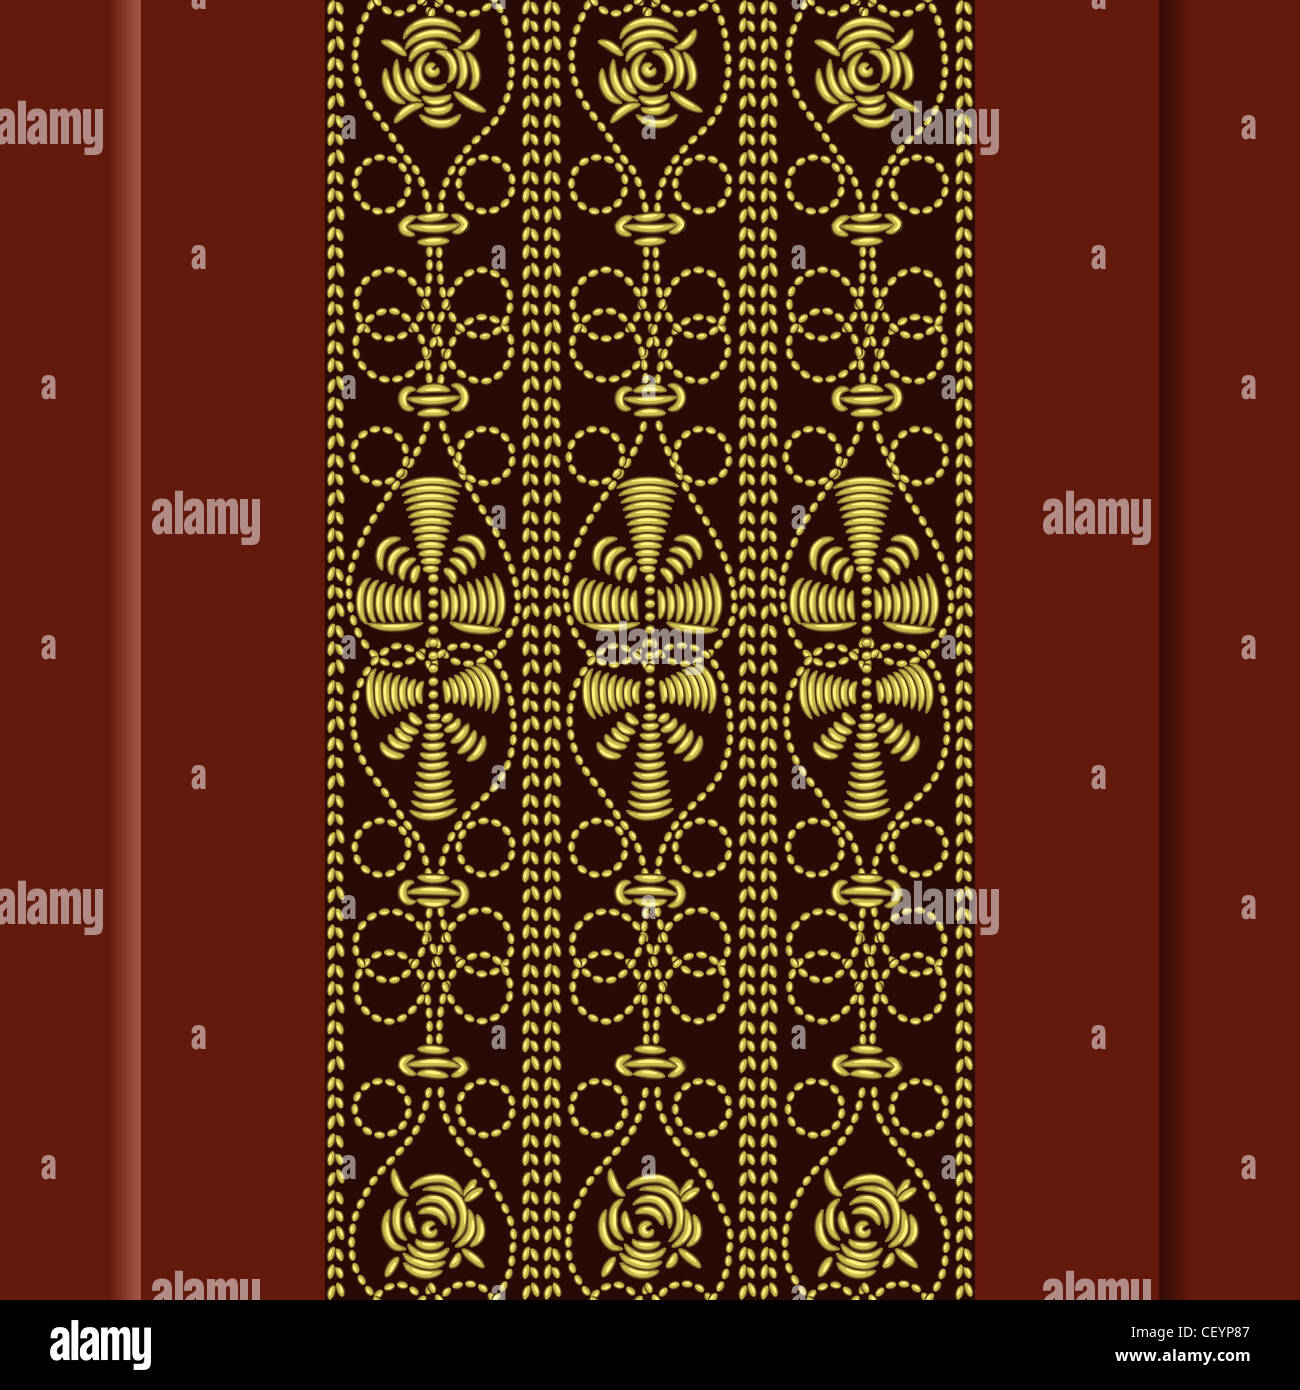 Traditional vintage pattern, gold embroidery: rose, leaves, swirls on a red background Stock Photo